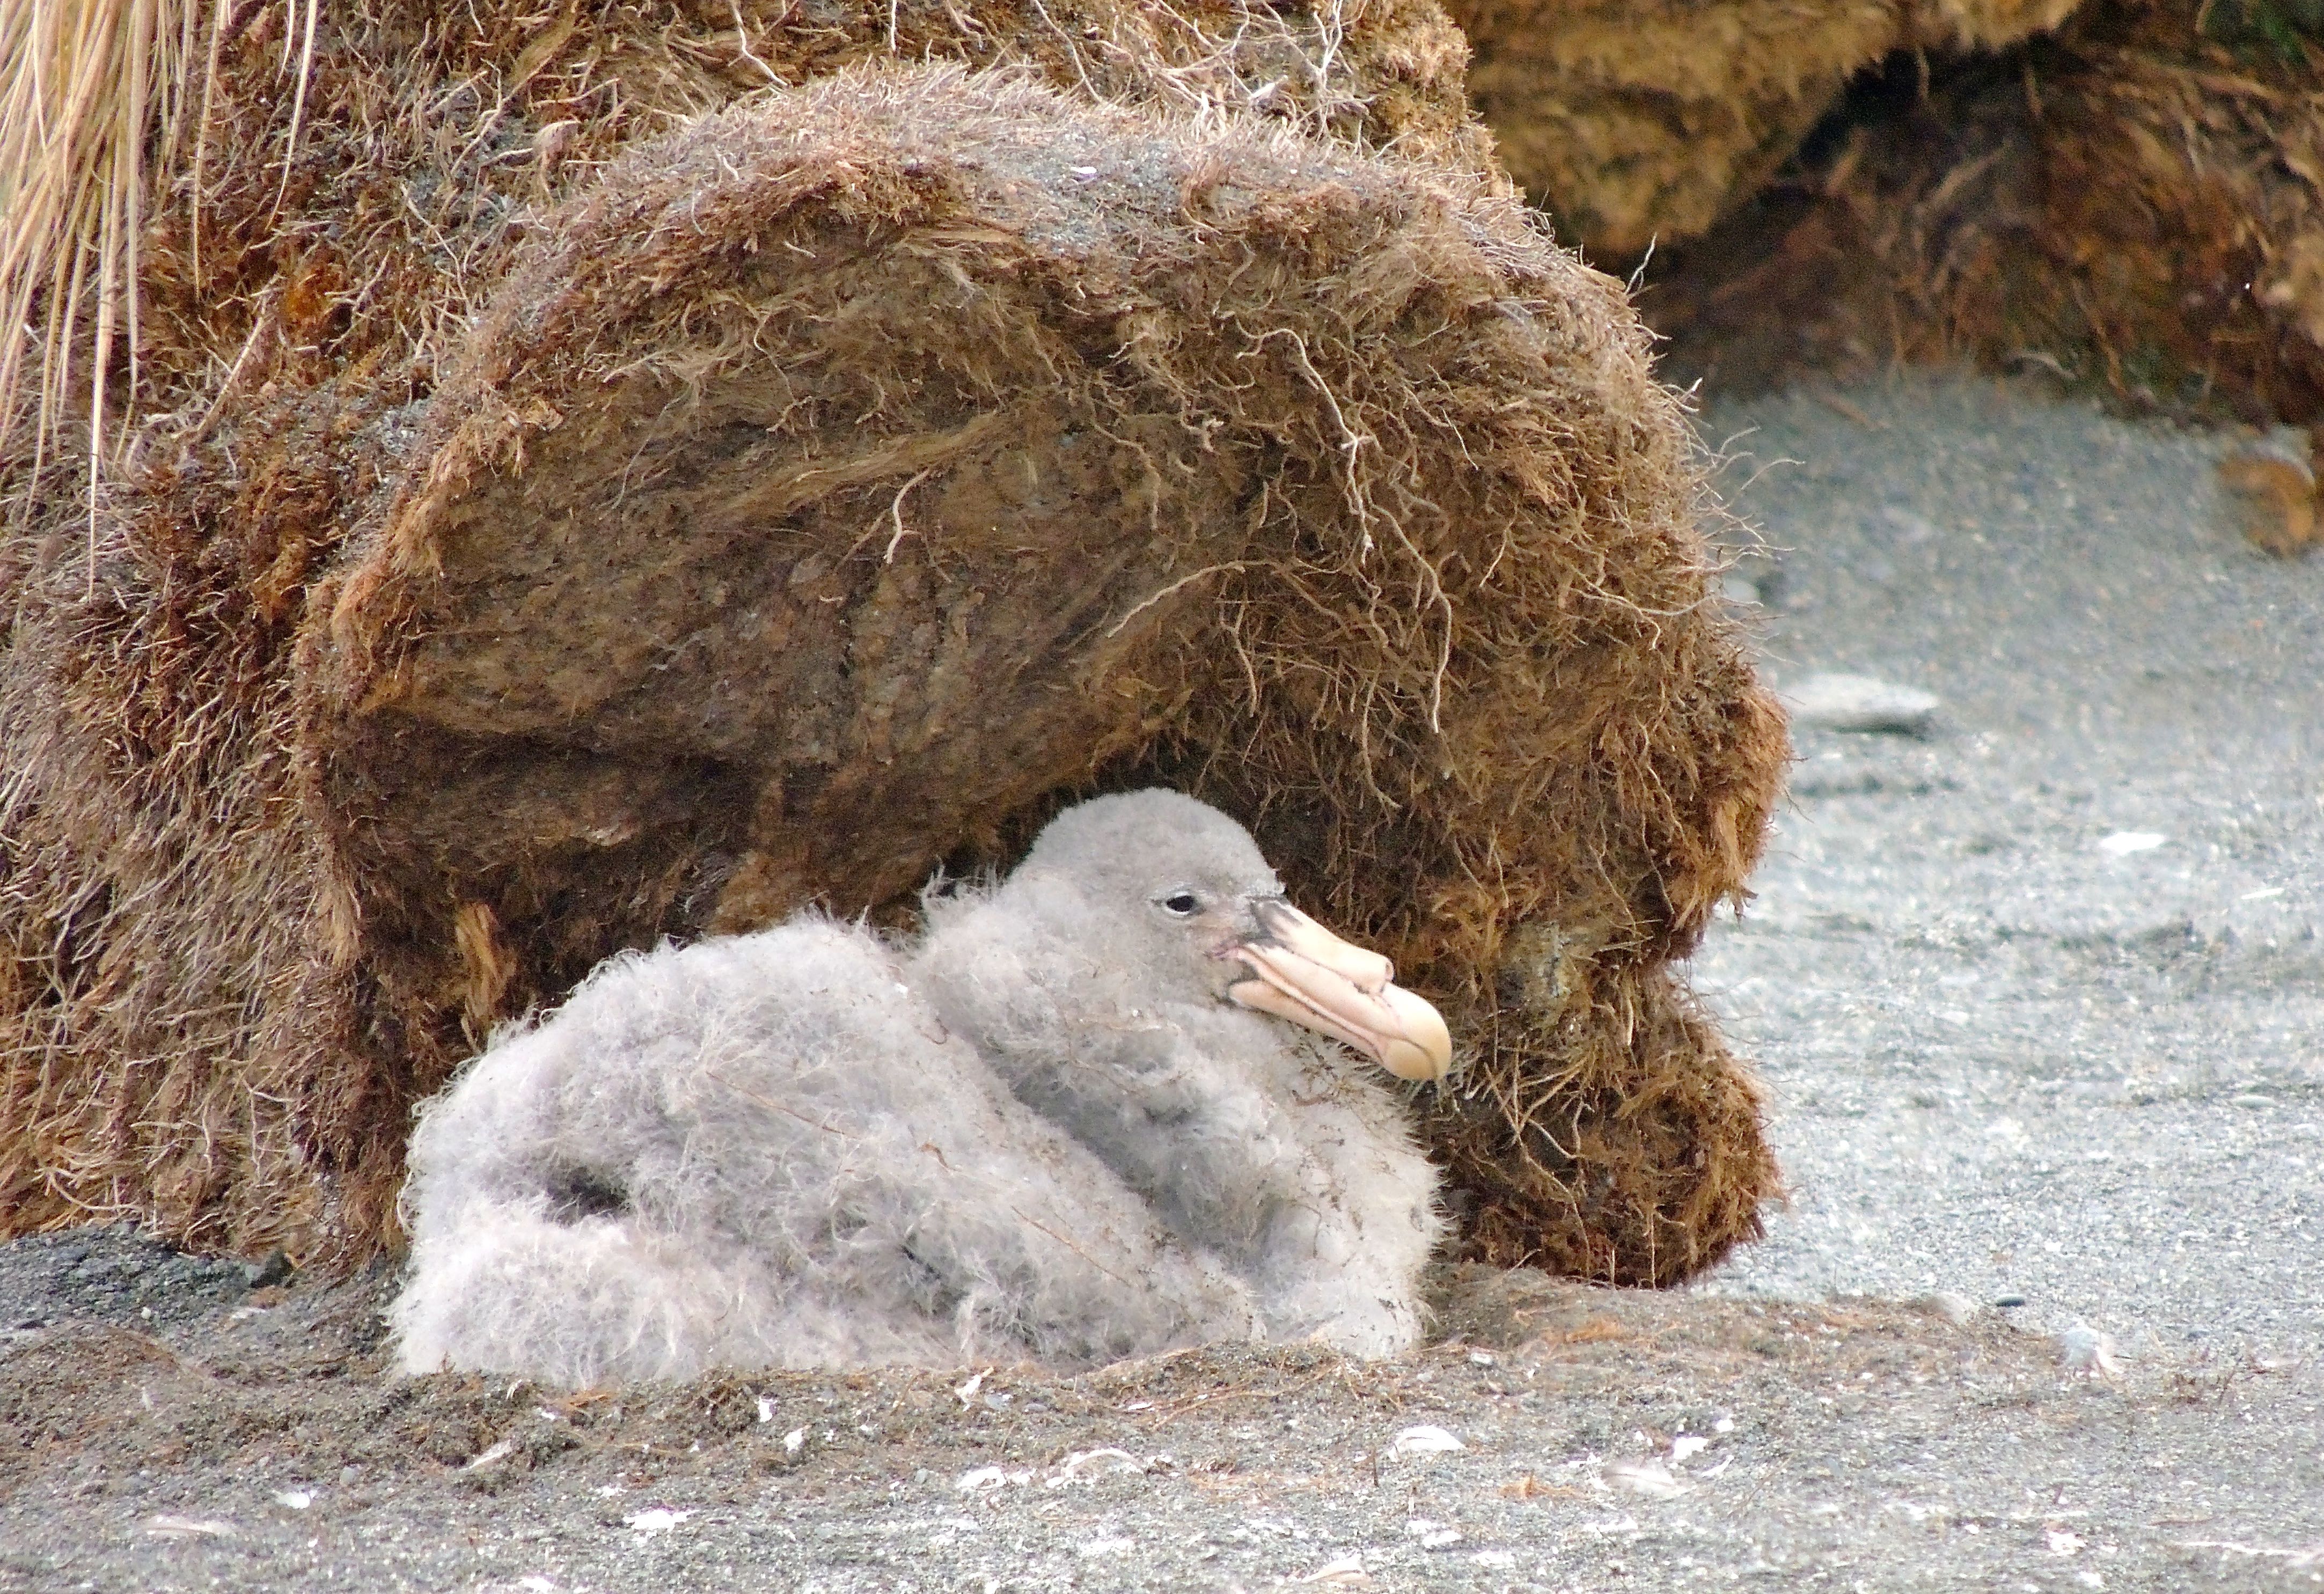 Northern Giant Petrel